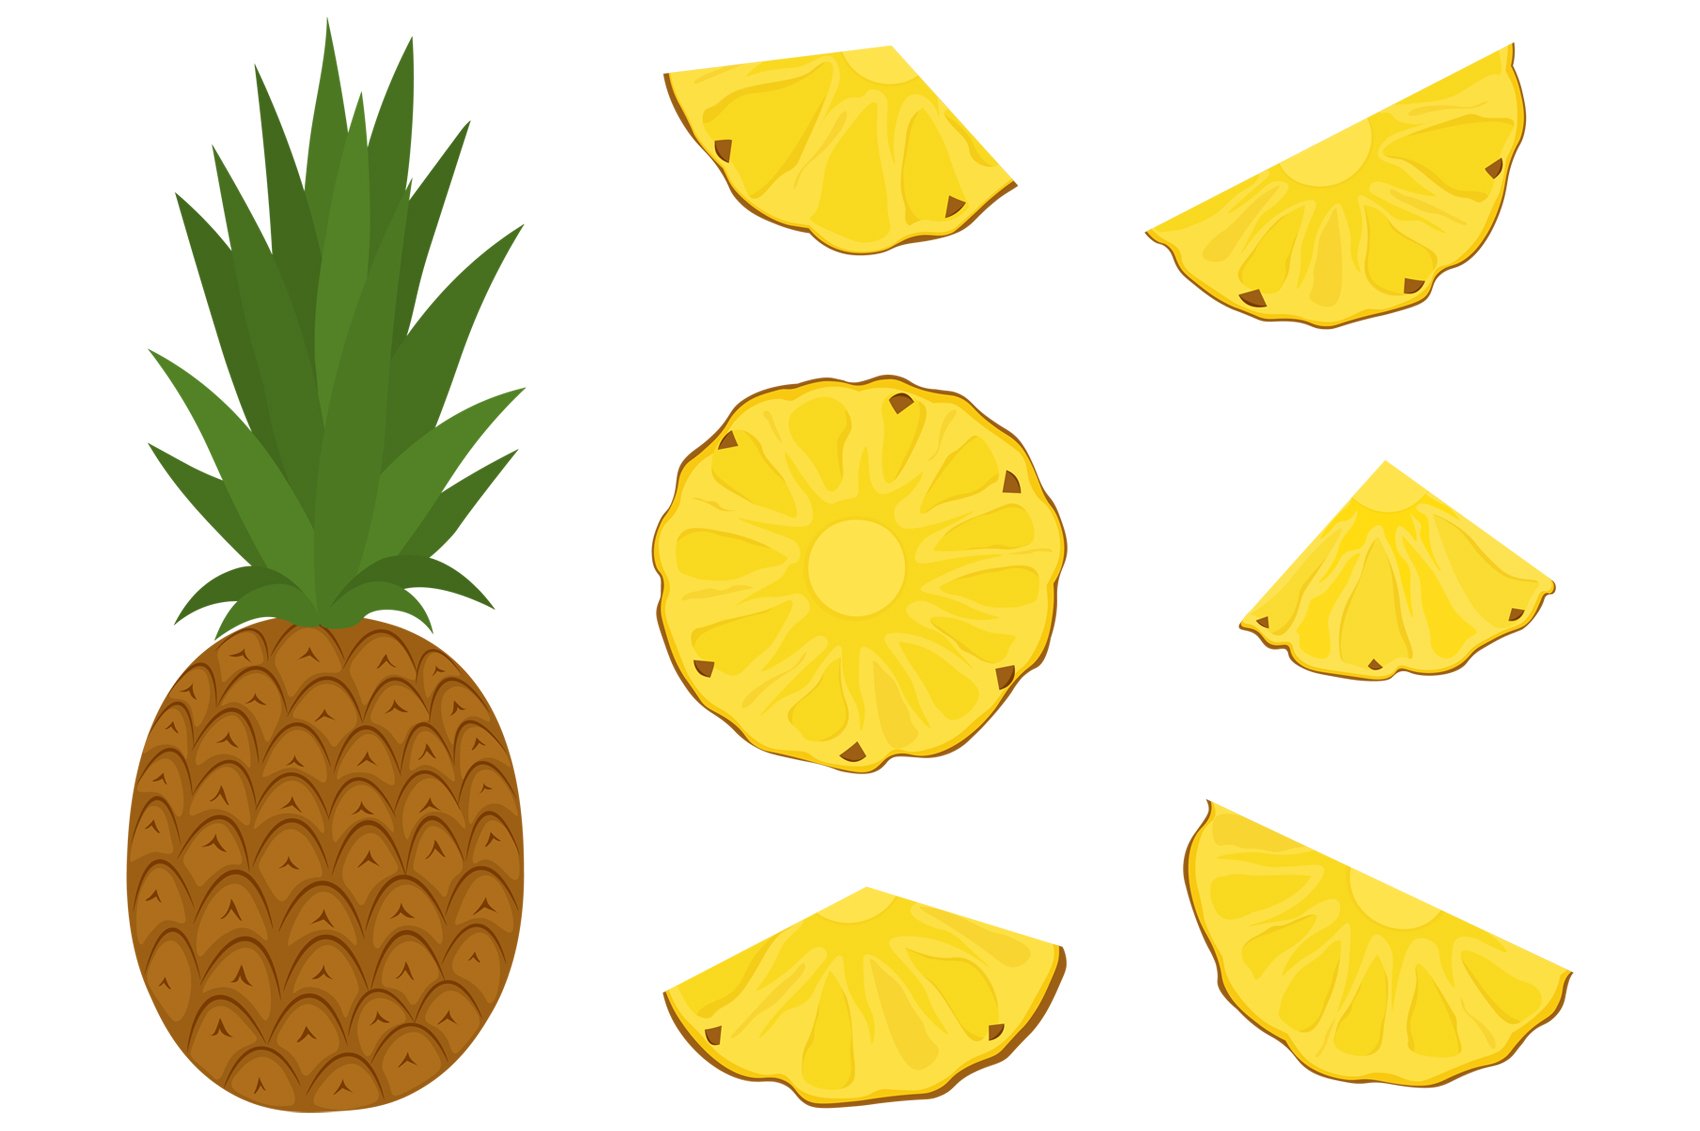 Diverse of the pineapple parts.